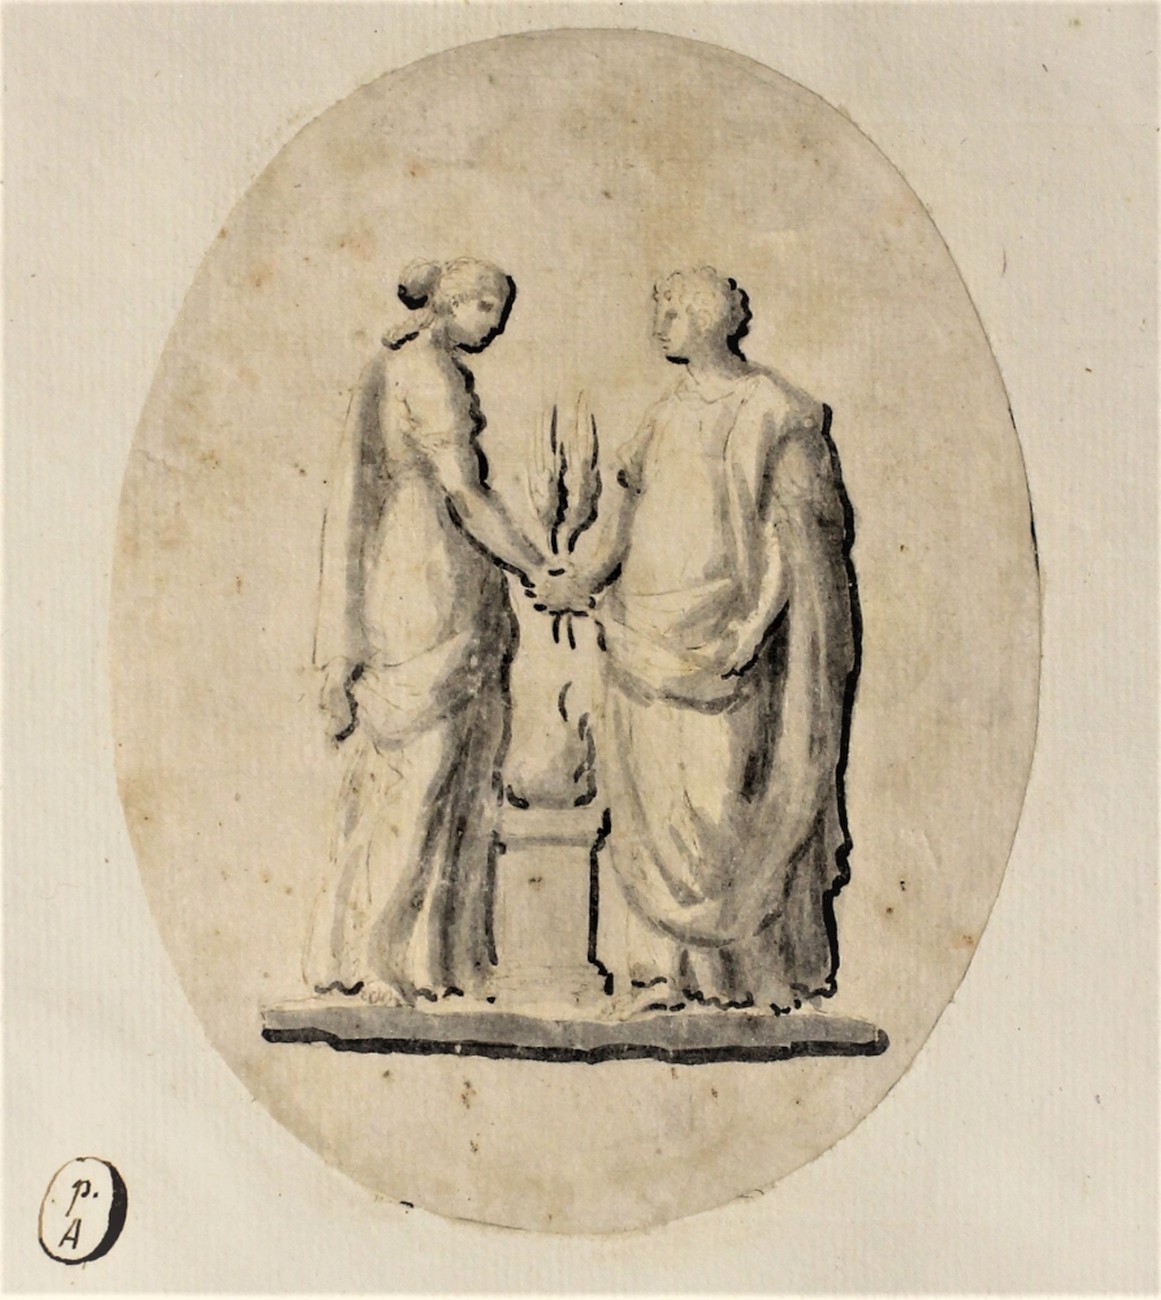 Concordia - two figures shaking hands in the sign of an agreement